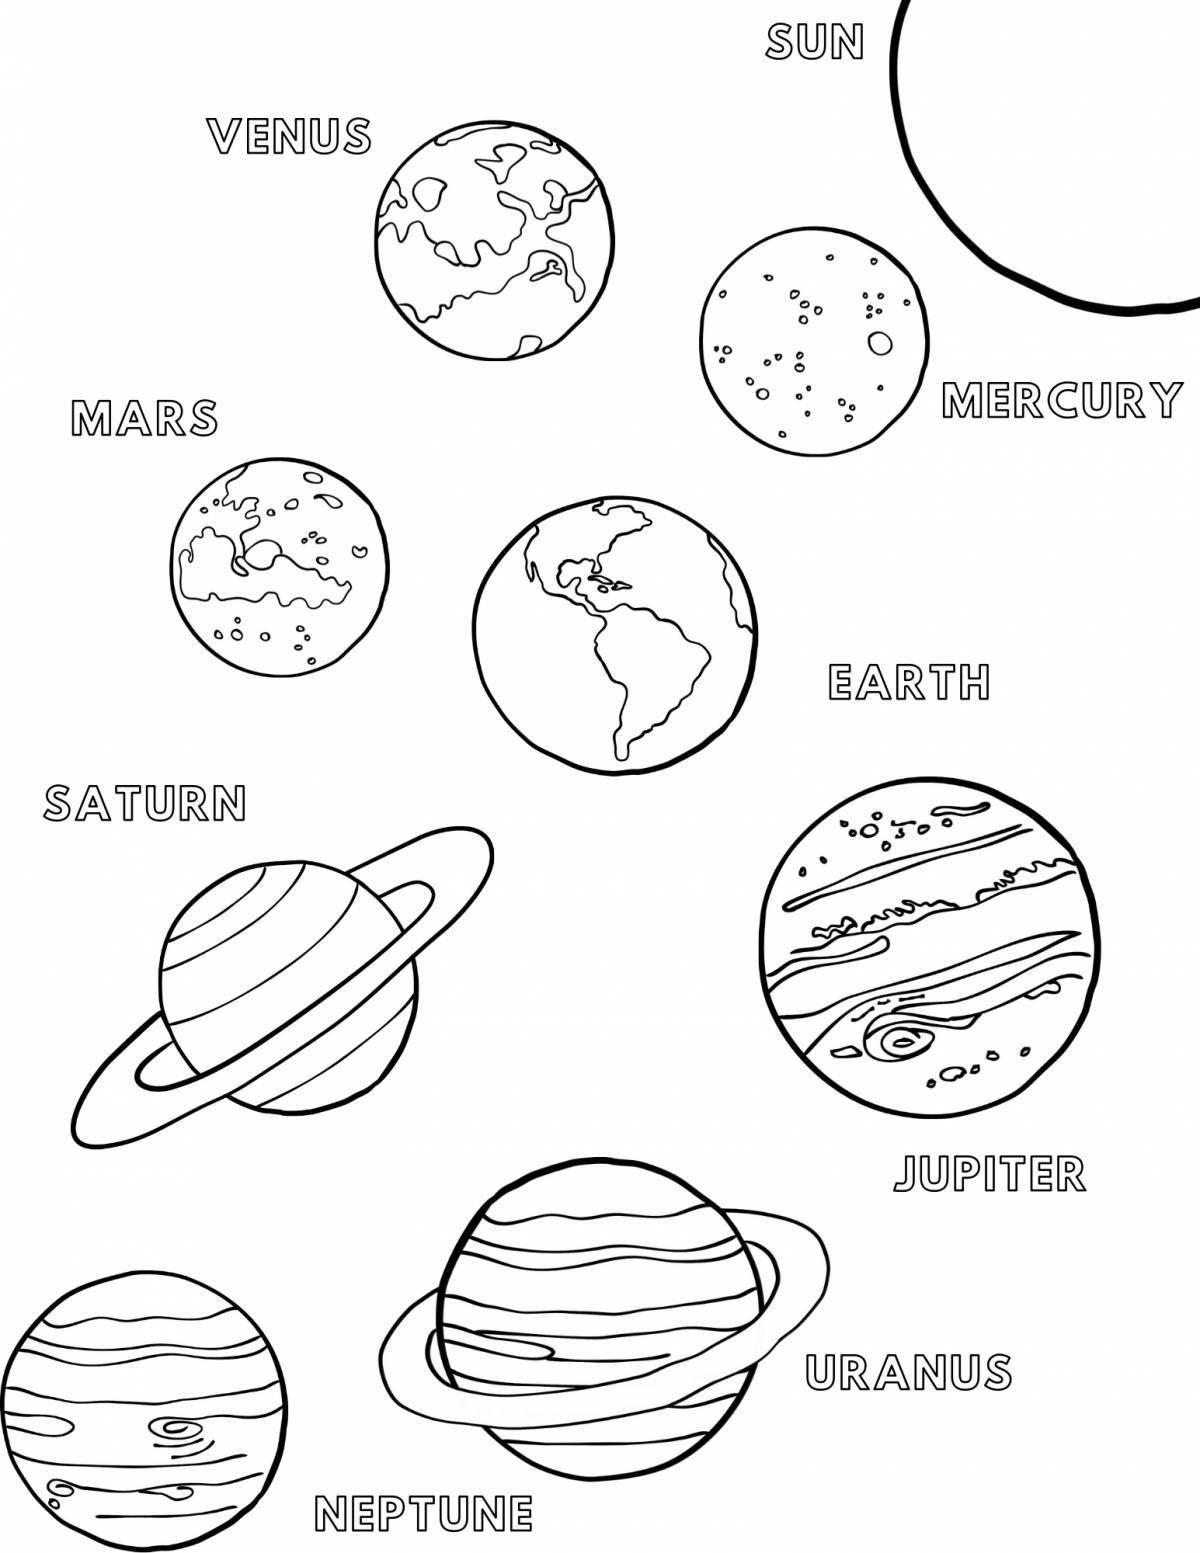 Accurate coloring of planets in the solar system for children